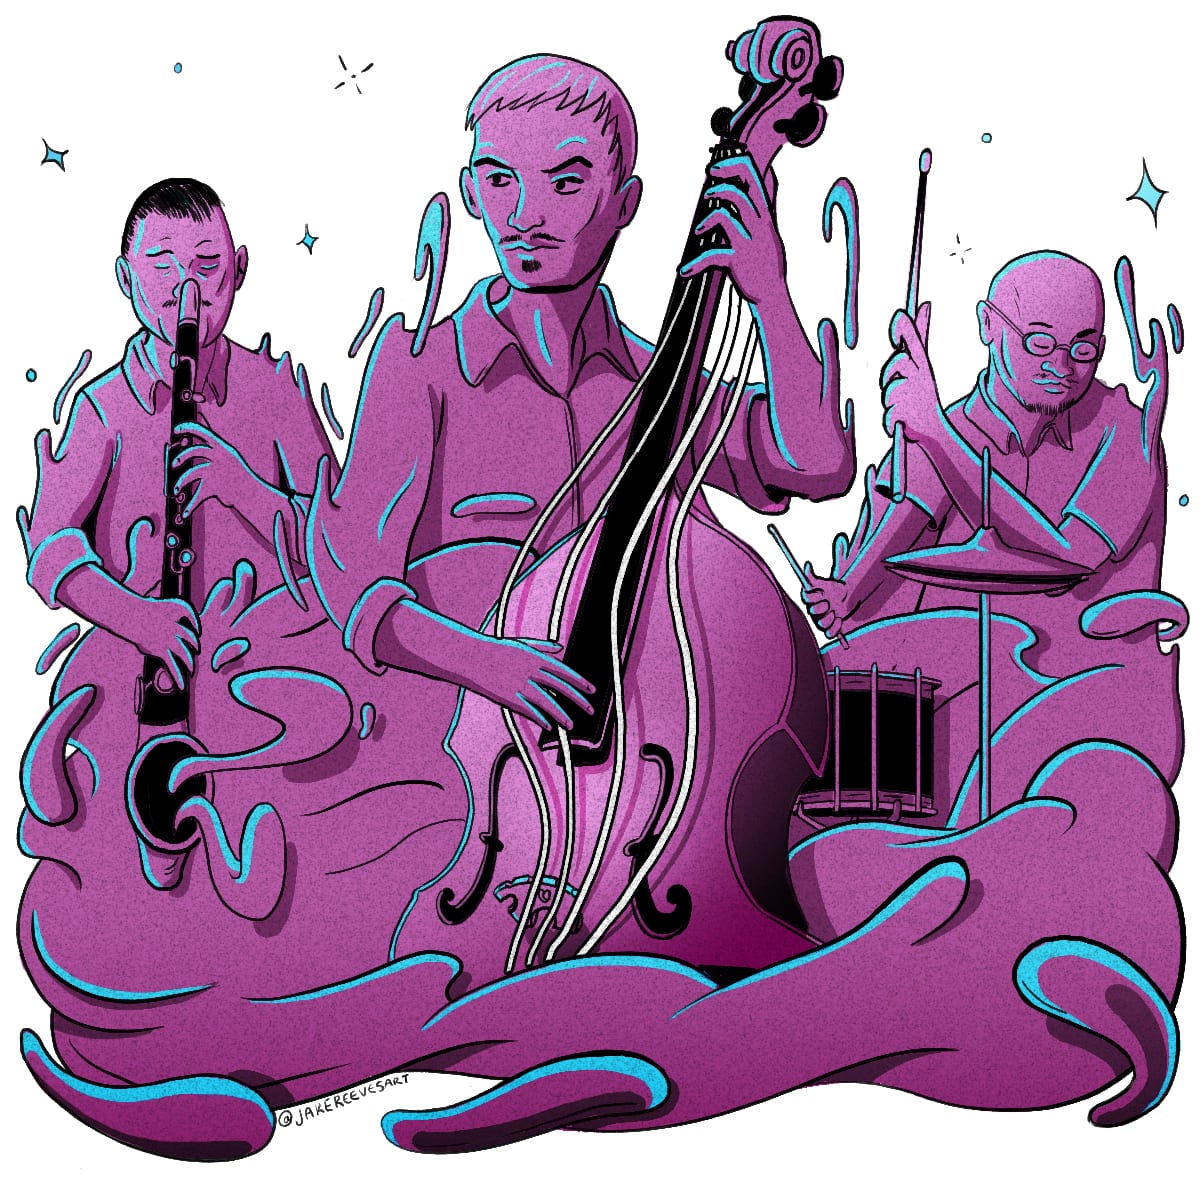 Illustration by Jake Reeves for CapitalBop